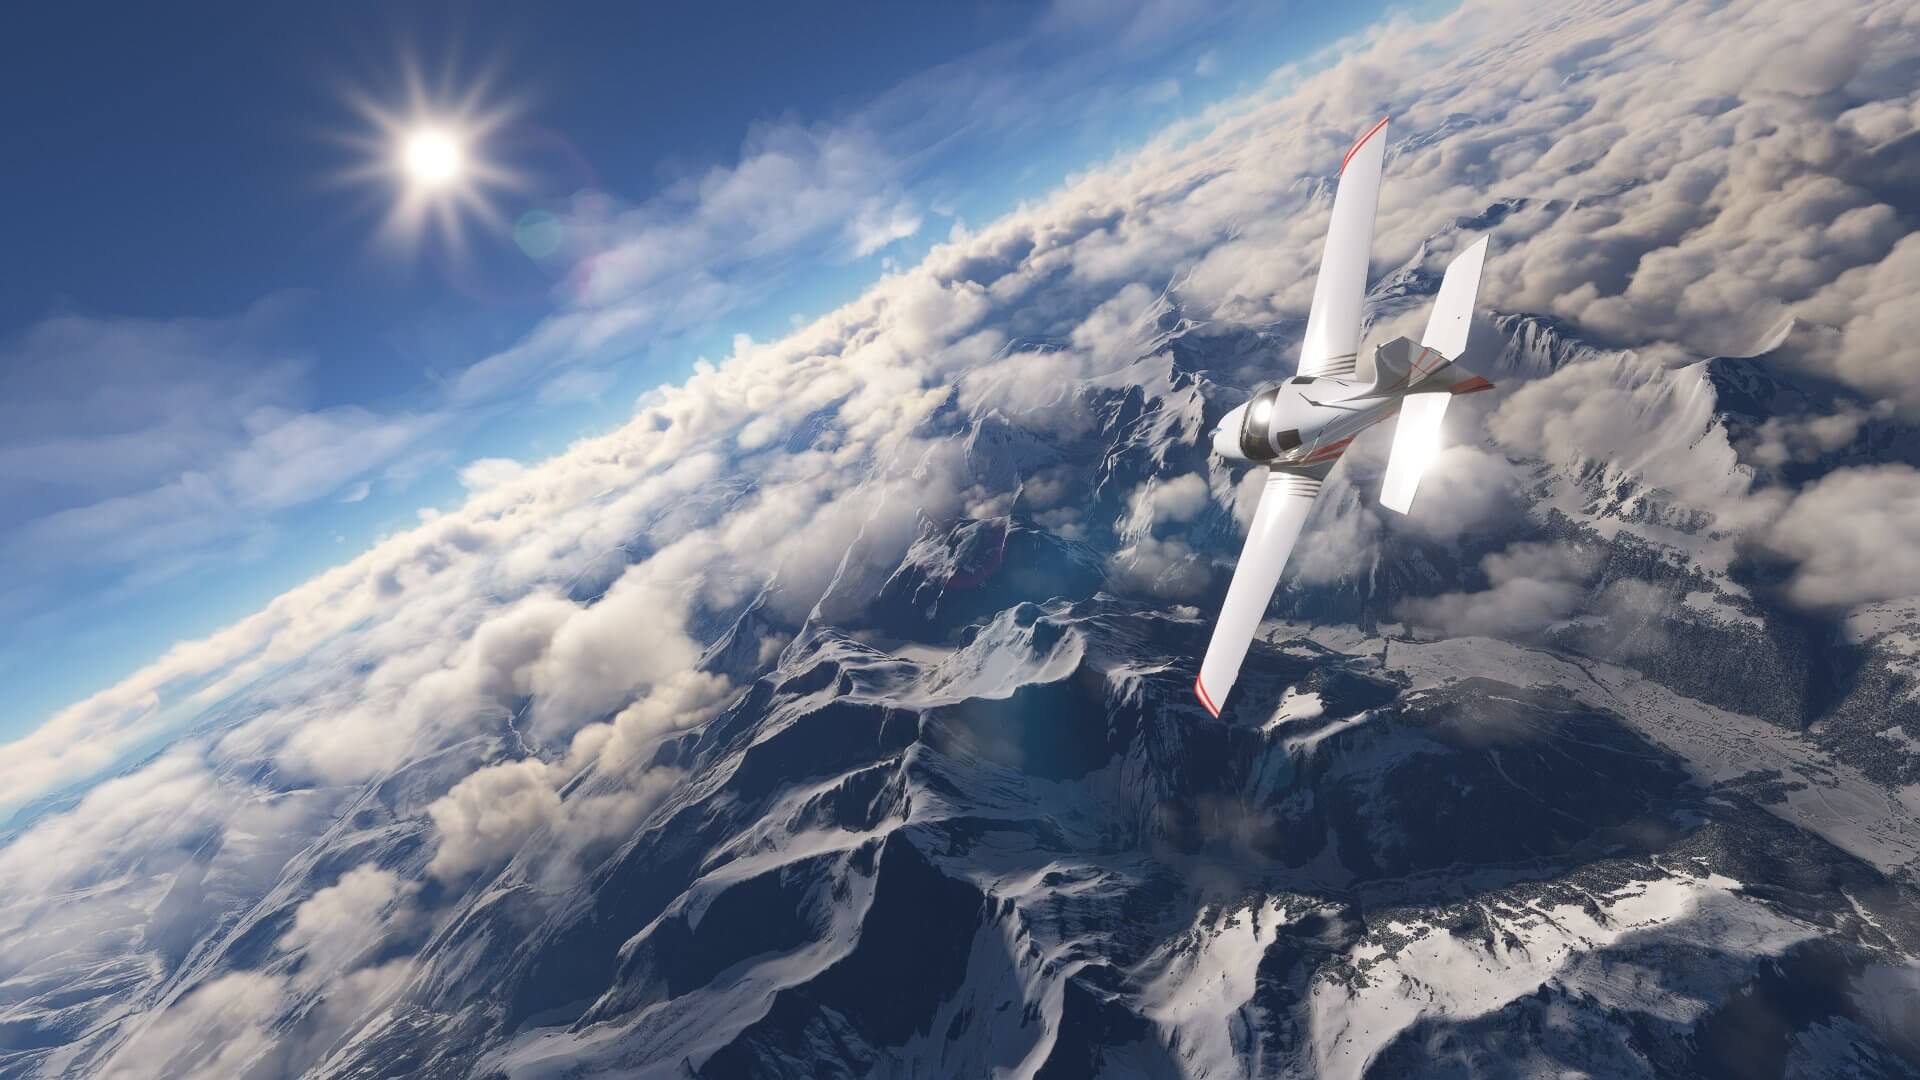 A low wing GA aircraft passes at high altitude above the alps